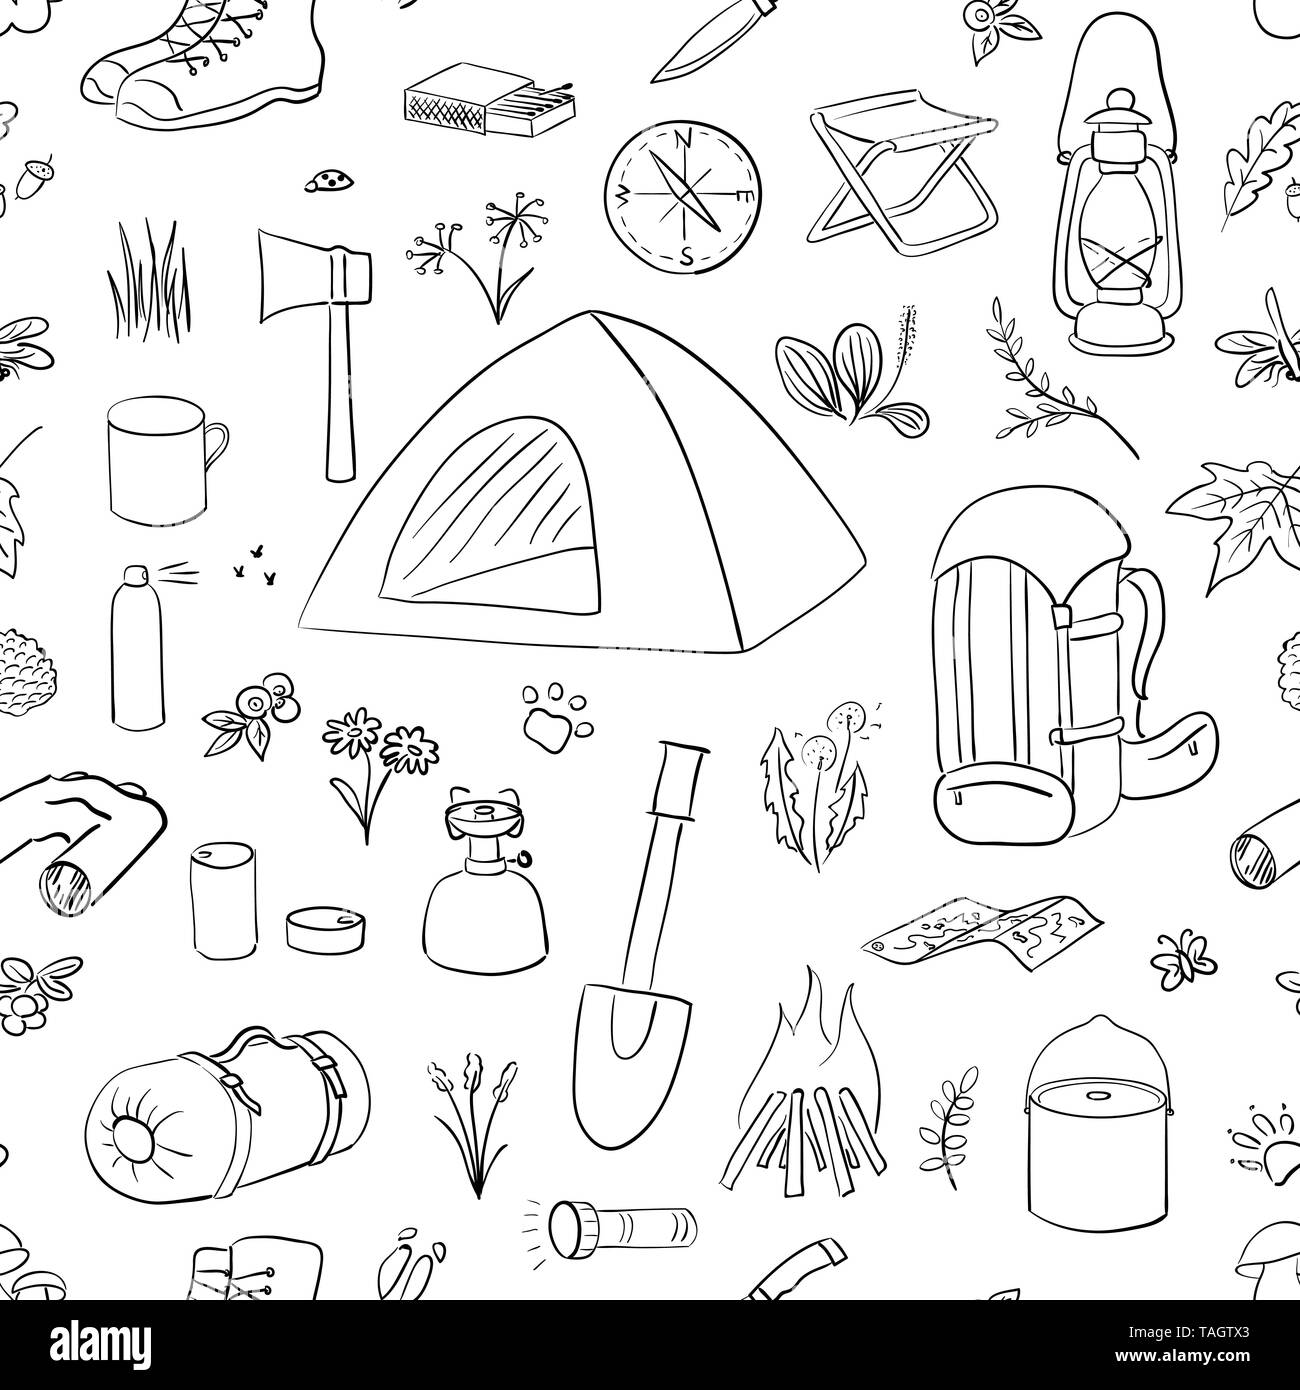 https://c8.alamy.com/comp/TAGTX3/camping-hiking-icons-sketch-set-camping-equipment-seamless-vector-pattern-inc-pen-binoculars-bowl-barbecue-lantern-shoes-backpack-tent-campf-TAGTX3.jpg